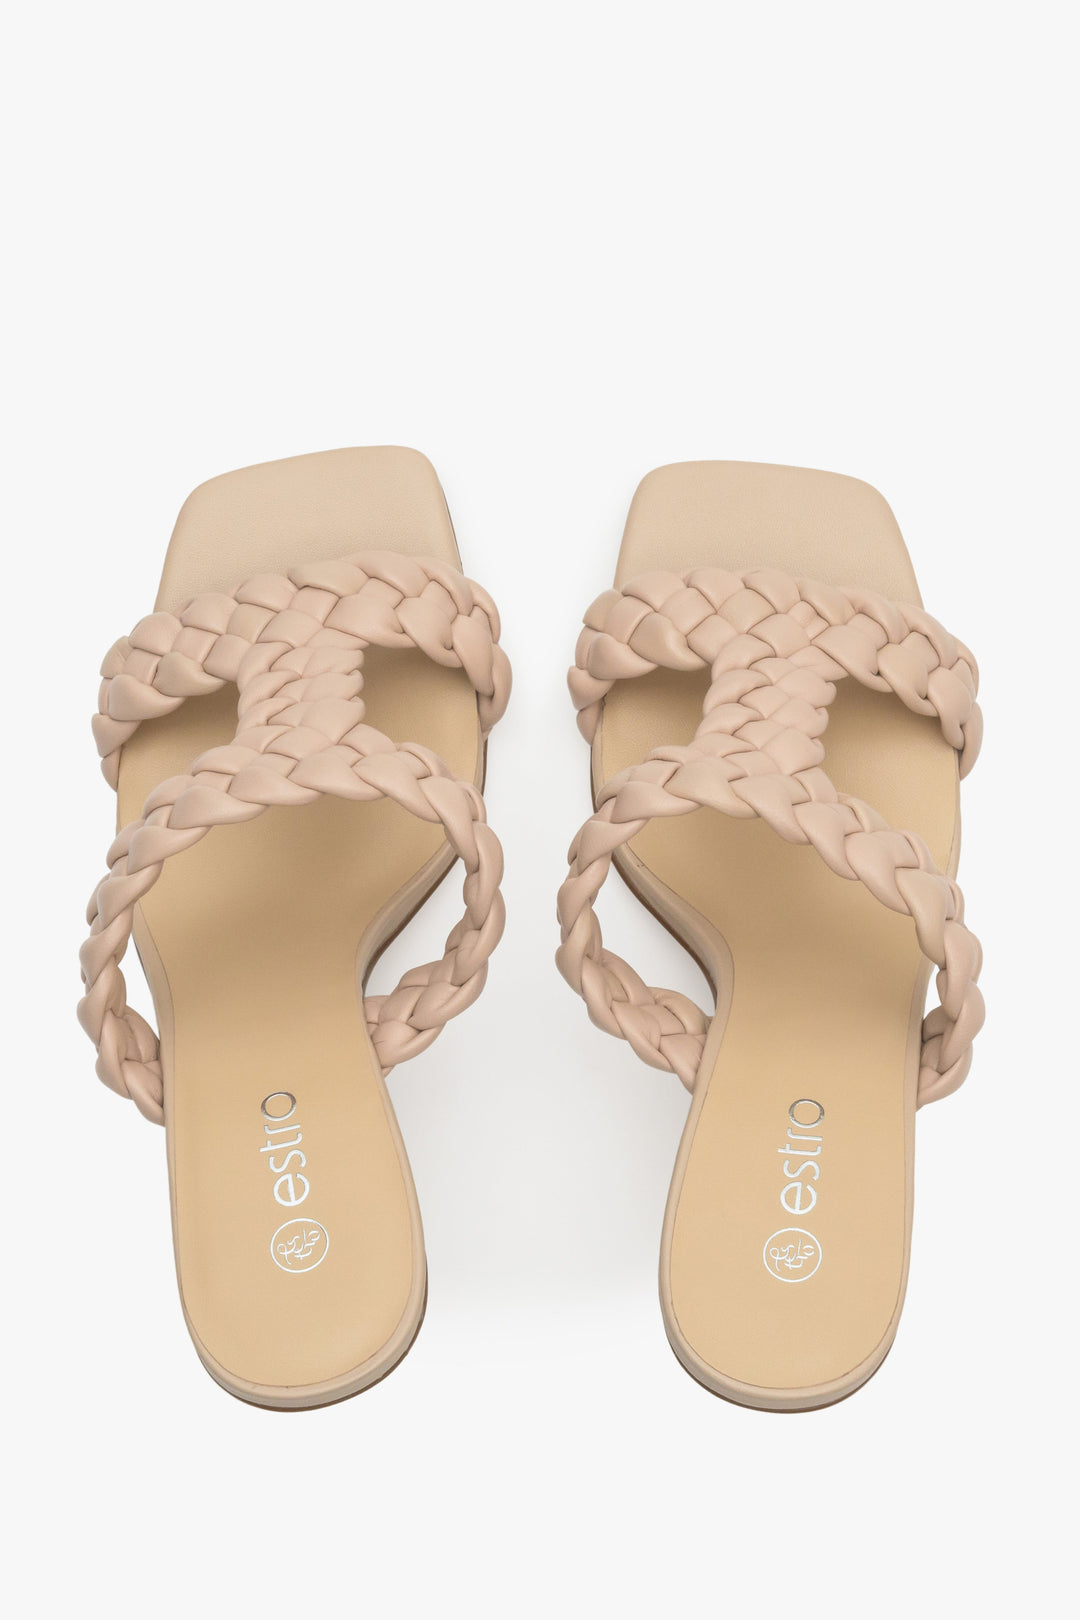 Beige heeled mules with embroided straps made of genuine leather, Estro brand.